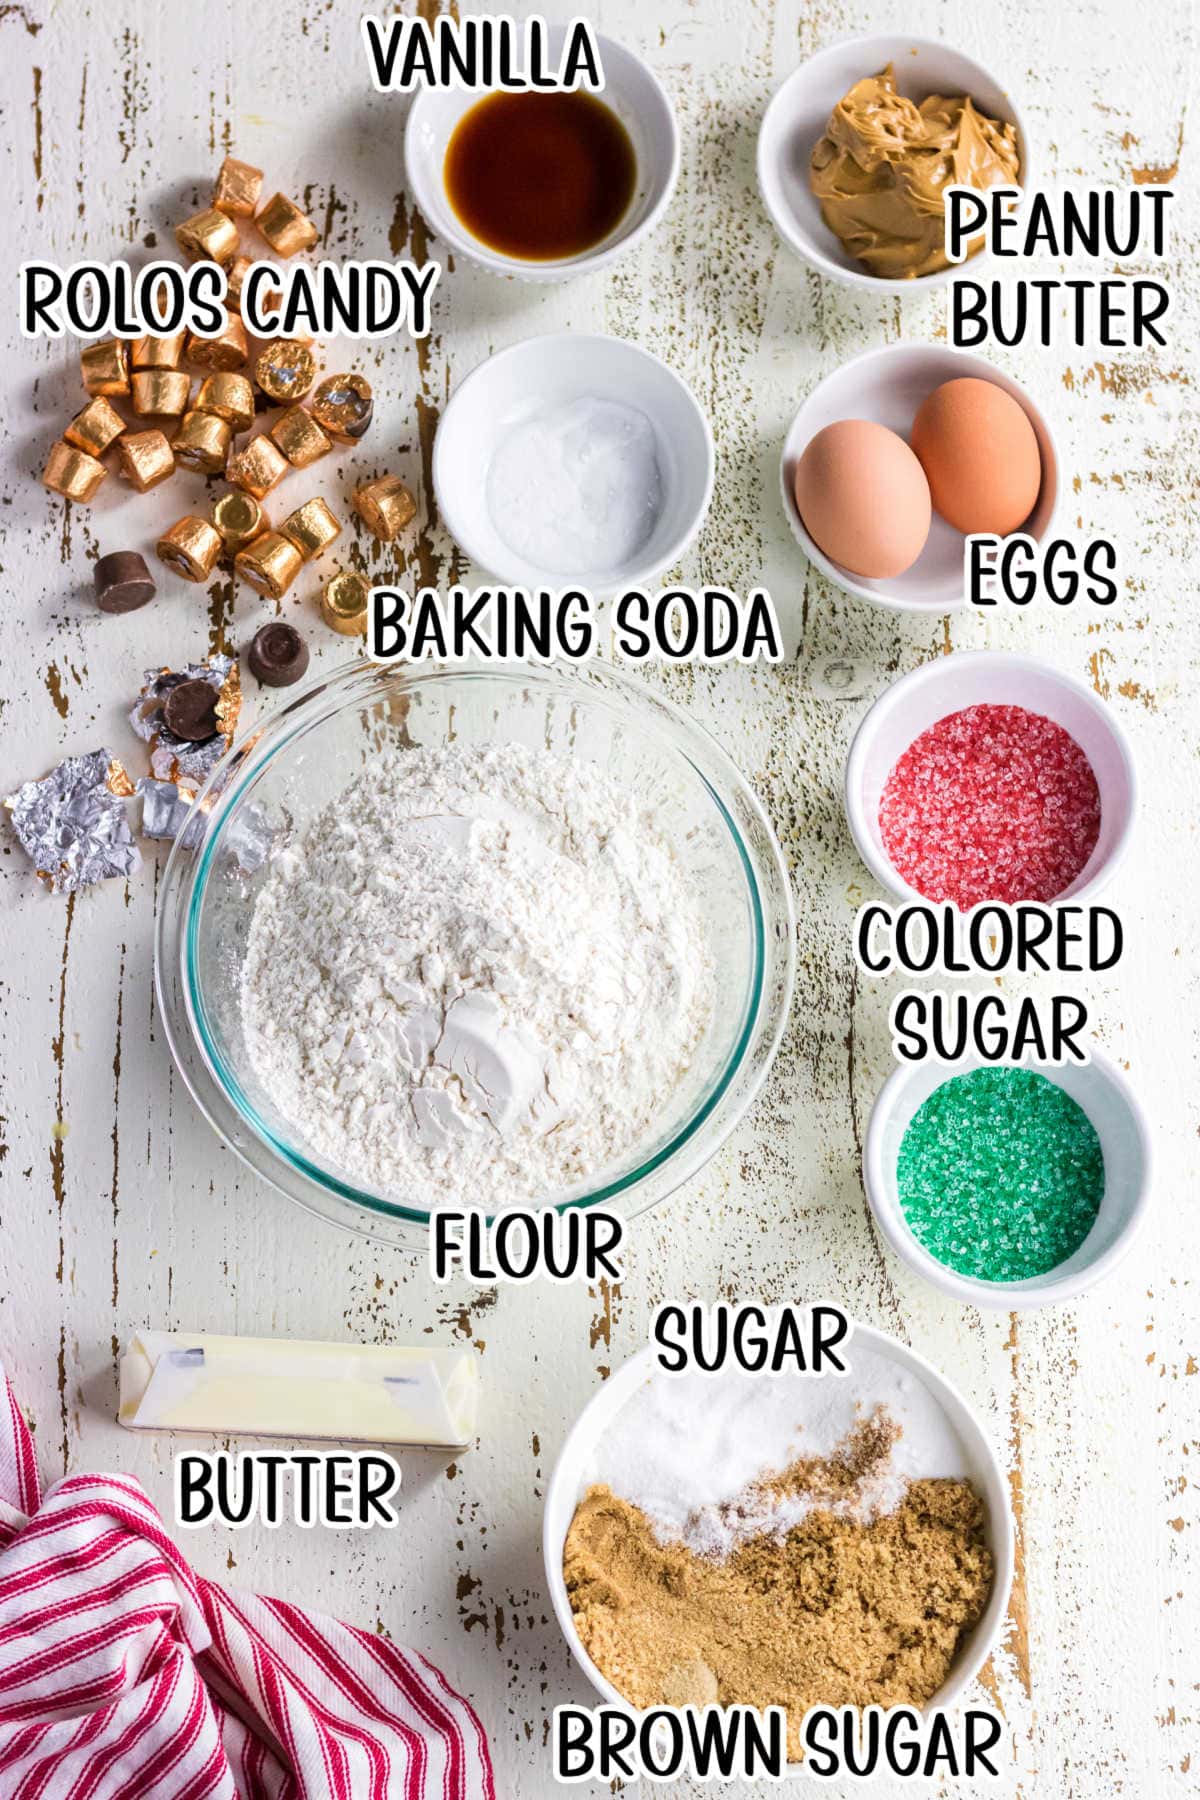 Labled ingredients for these cookies.